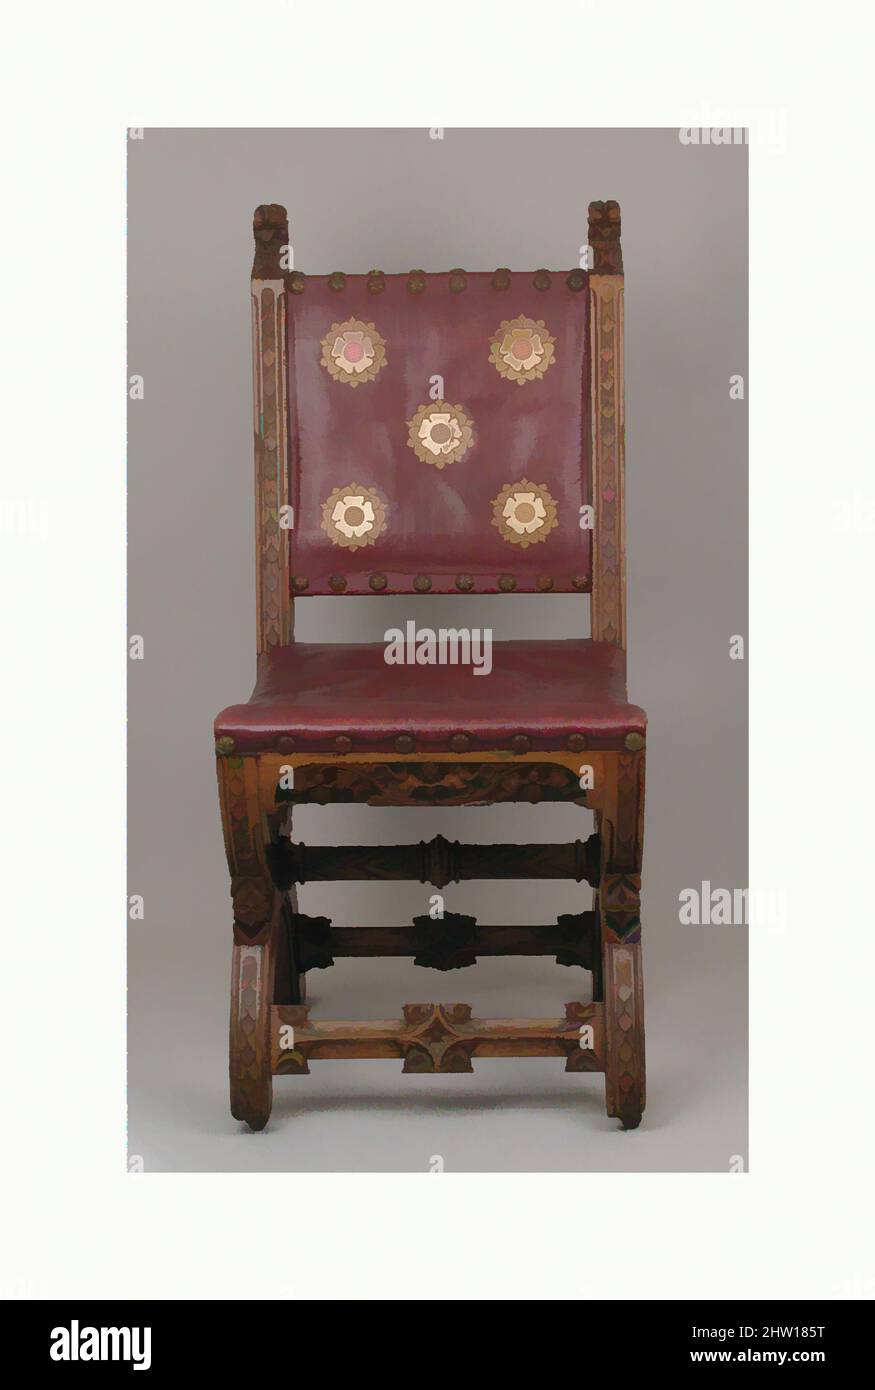 Art inspired by Side chair, ca. 1847, British, Carved oak, gold-stamped leather; metal casters, Overall (confirmed): 39 1/2 × 17 3/4 × 22 in. (100.3 × 45.1 × 55.9 cm), Woodwork-Furniture, John Webb (British, 1799–1880), This chair comes from the Palace of Westminster which was rebuilt, Classic works modernized by Artotop with a splash of modernity. Shapes, color and value, eye-catching visual impact on art. Emotions through freedom of artworks in a contemporary way. A timeless message pursuing a wildly creative new direction. Artists turning to the digital medium and creating the Artotop NFT Stock Photo